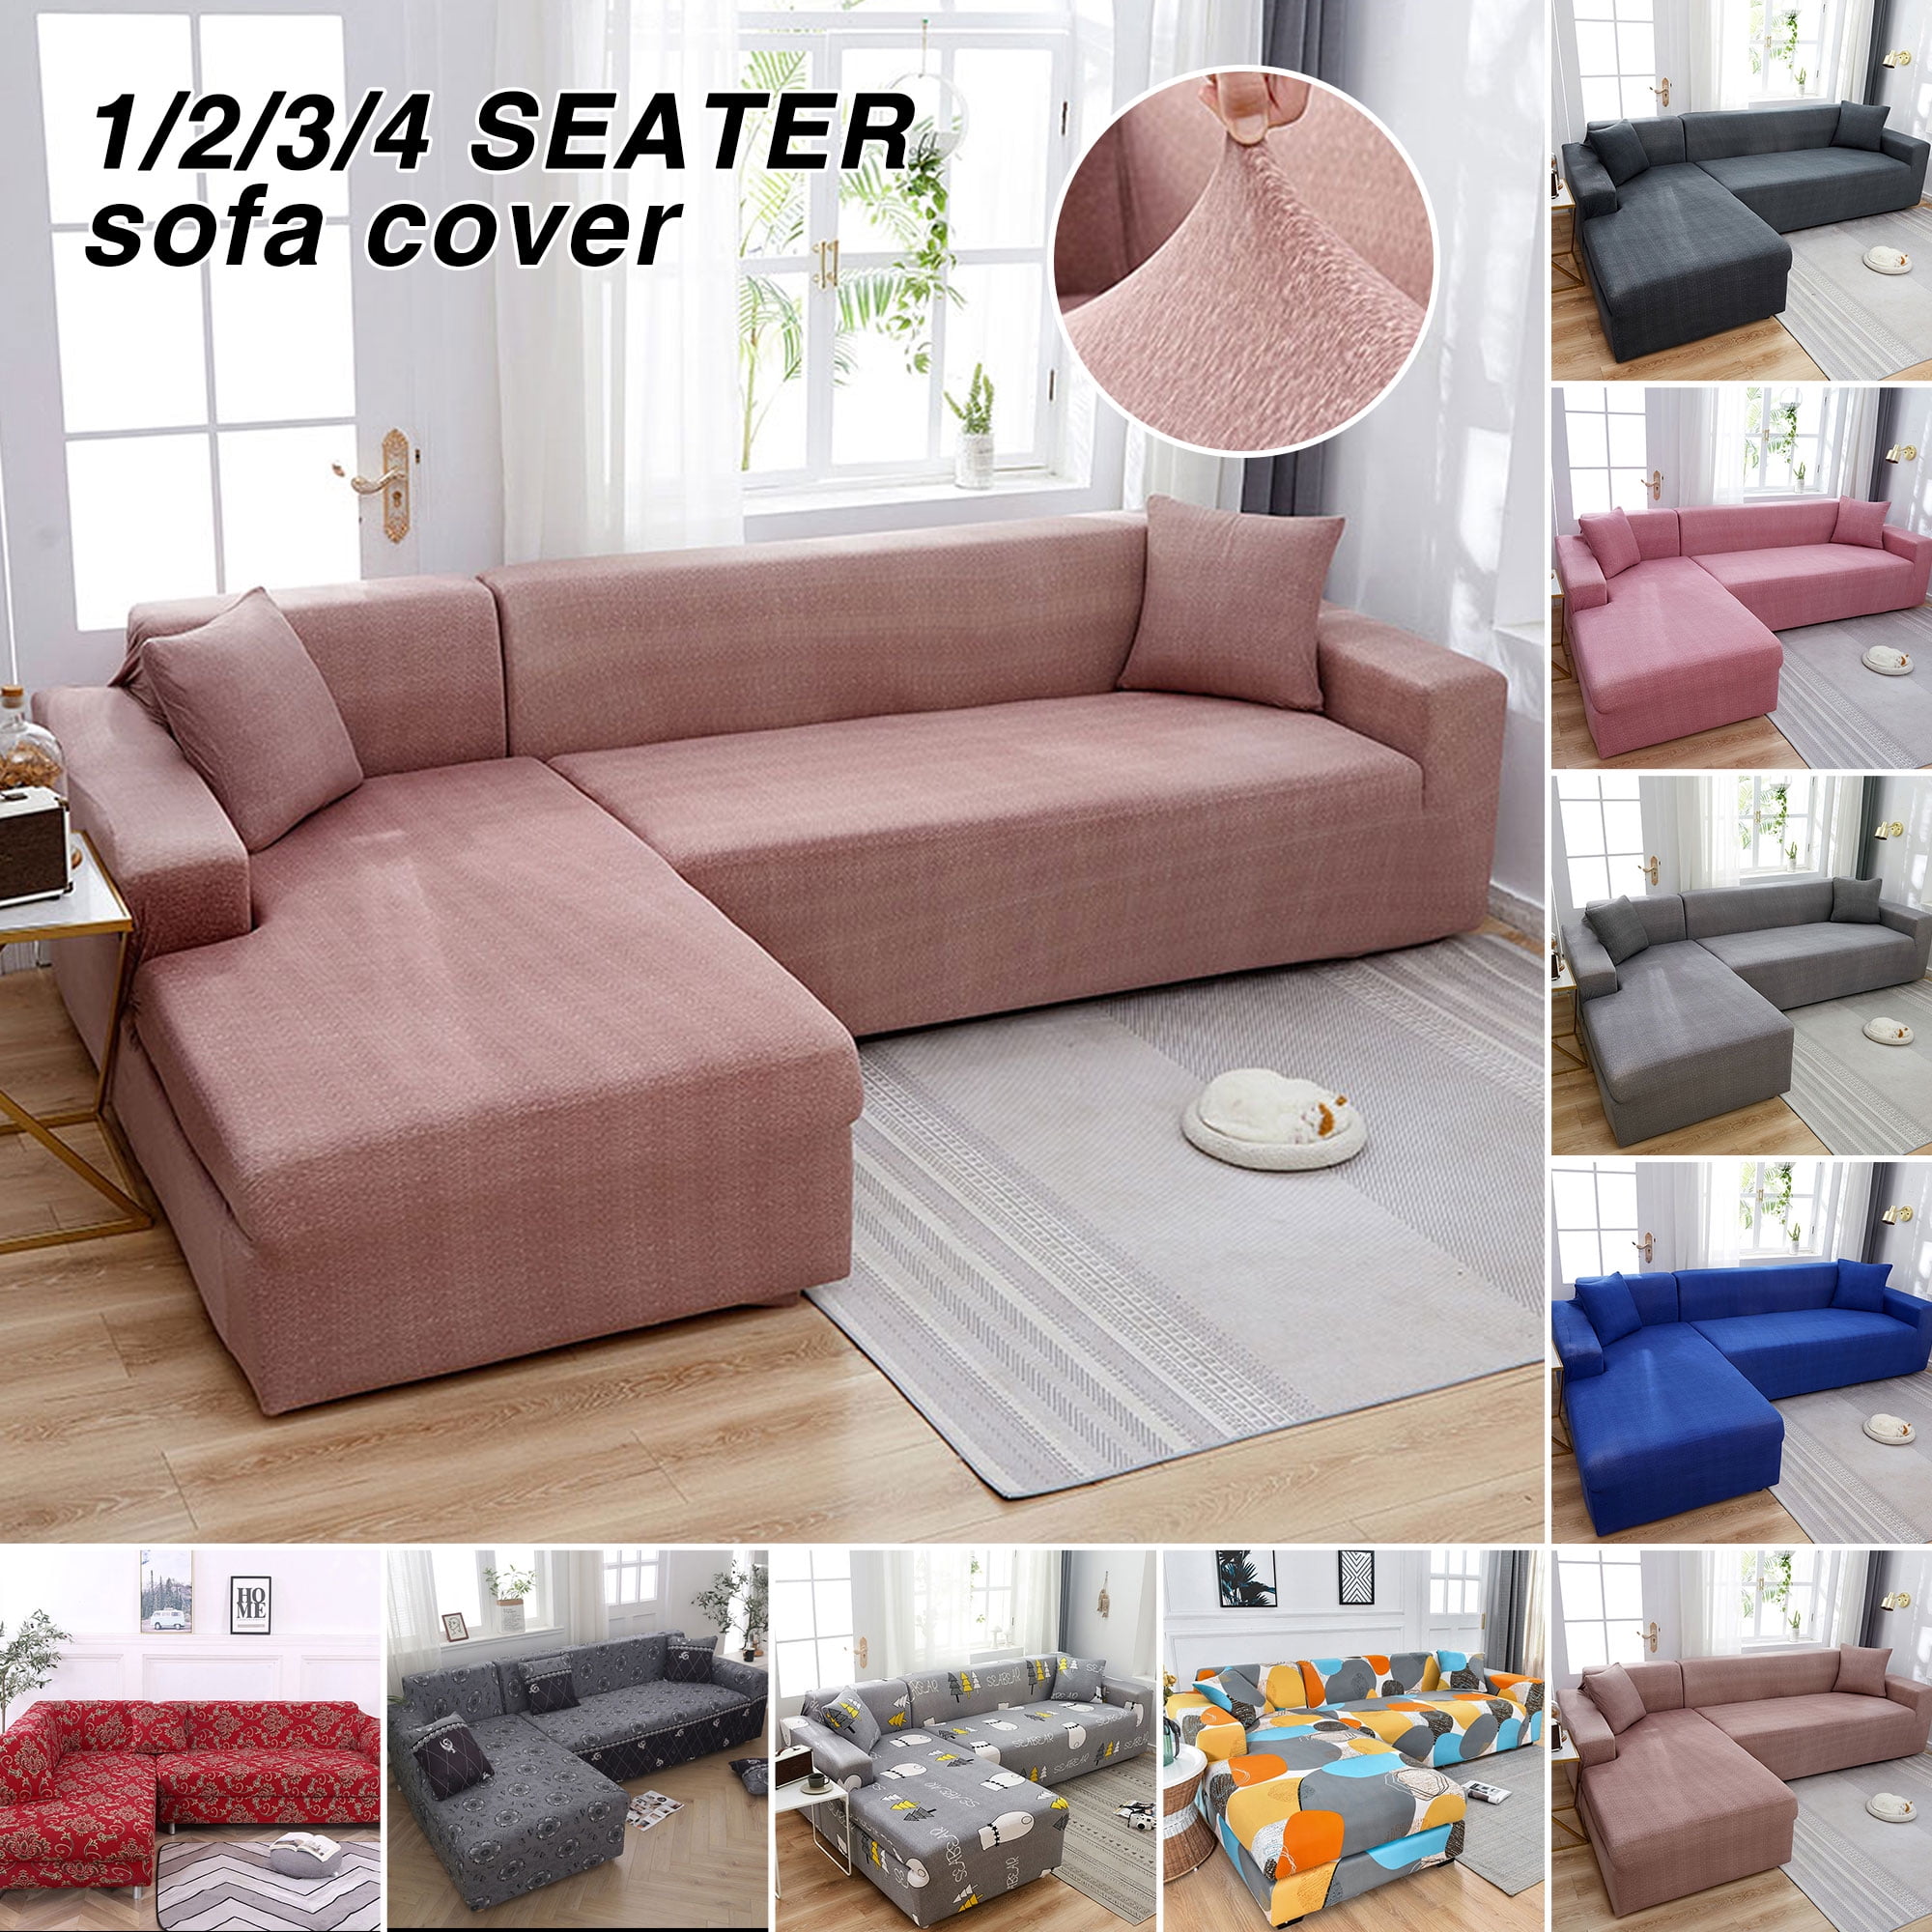 Details about   1/2/3/4 Seat L-Shaped Sofa Covers Couch Slipcover Stretch Elastic Settee Protect 